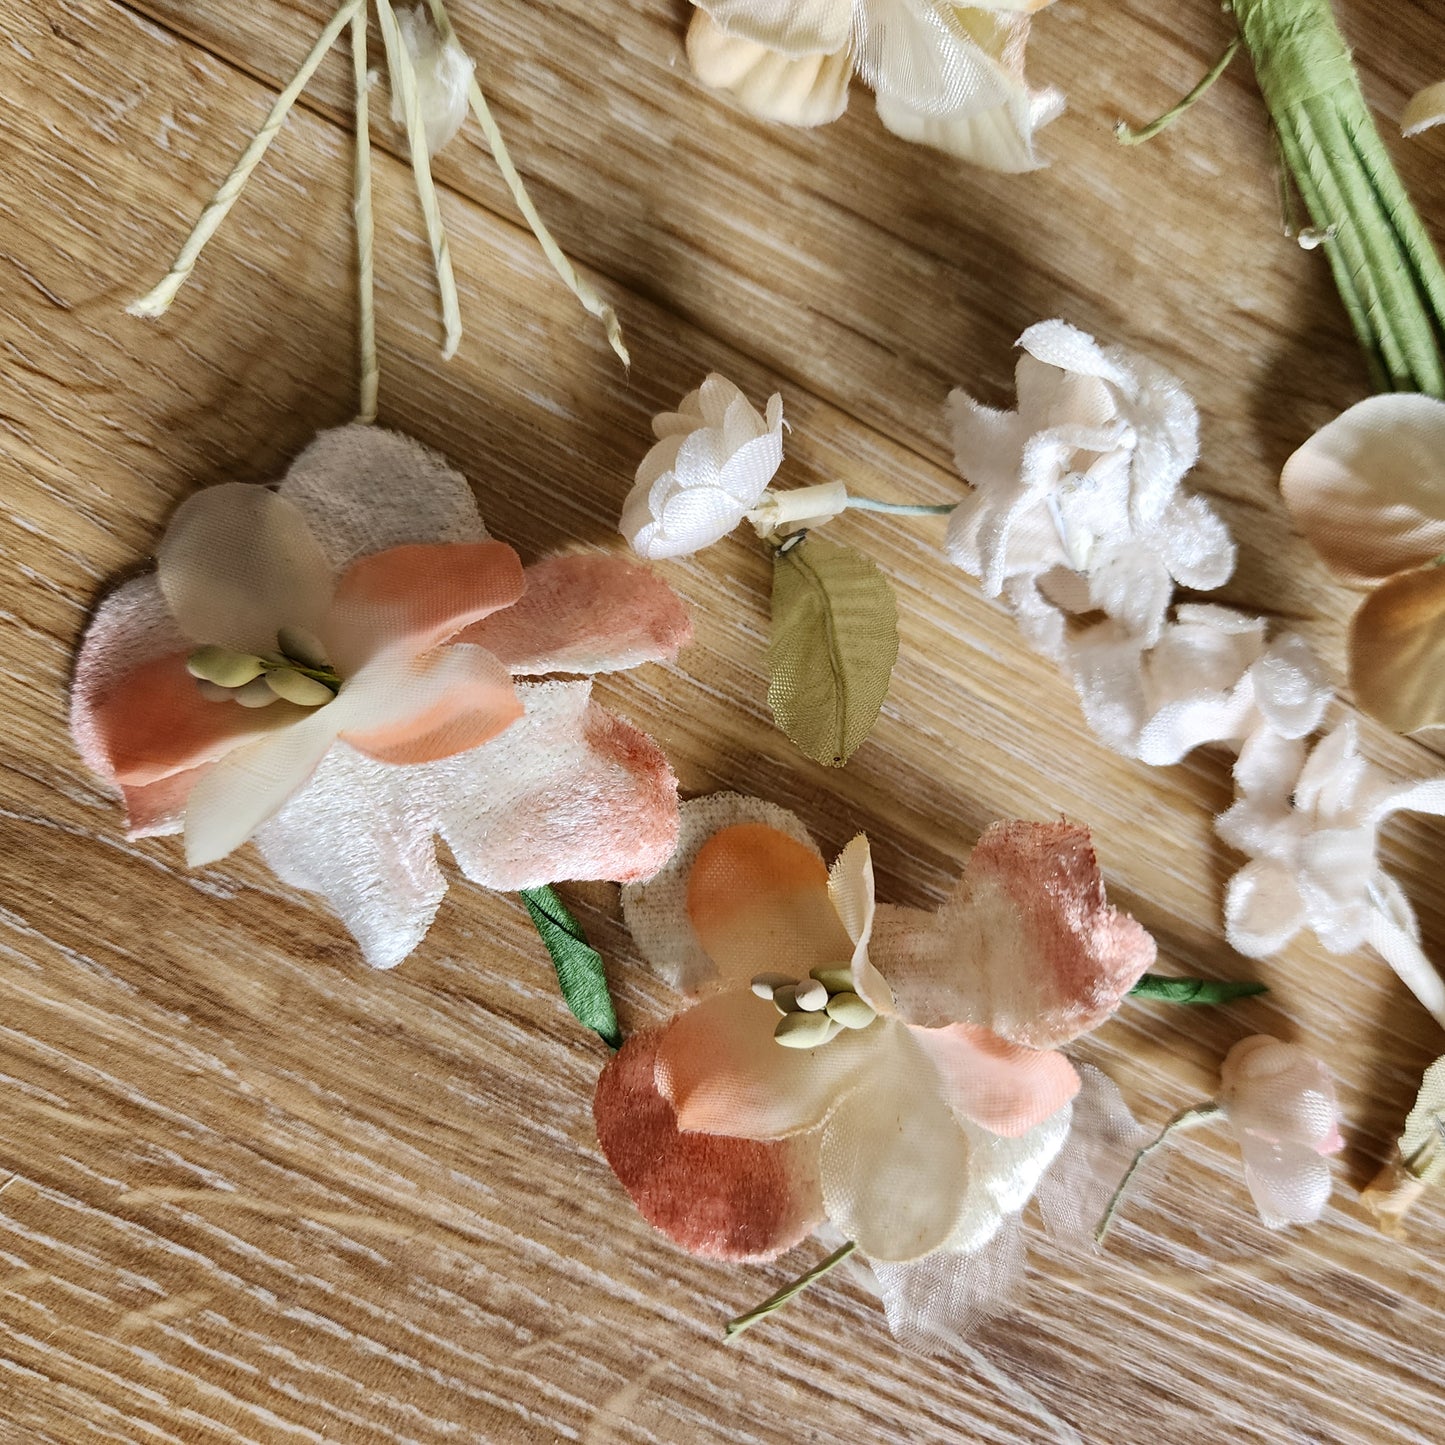 vintage white and peach floral millinery